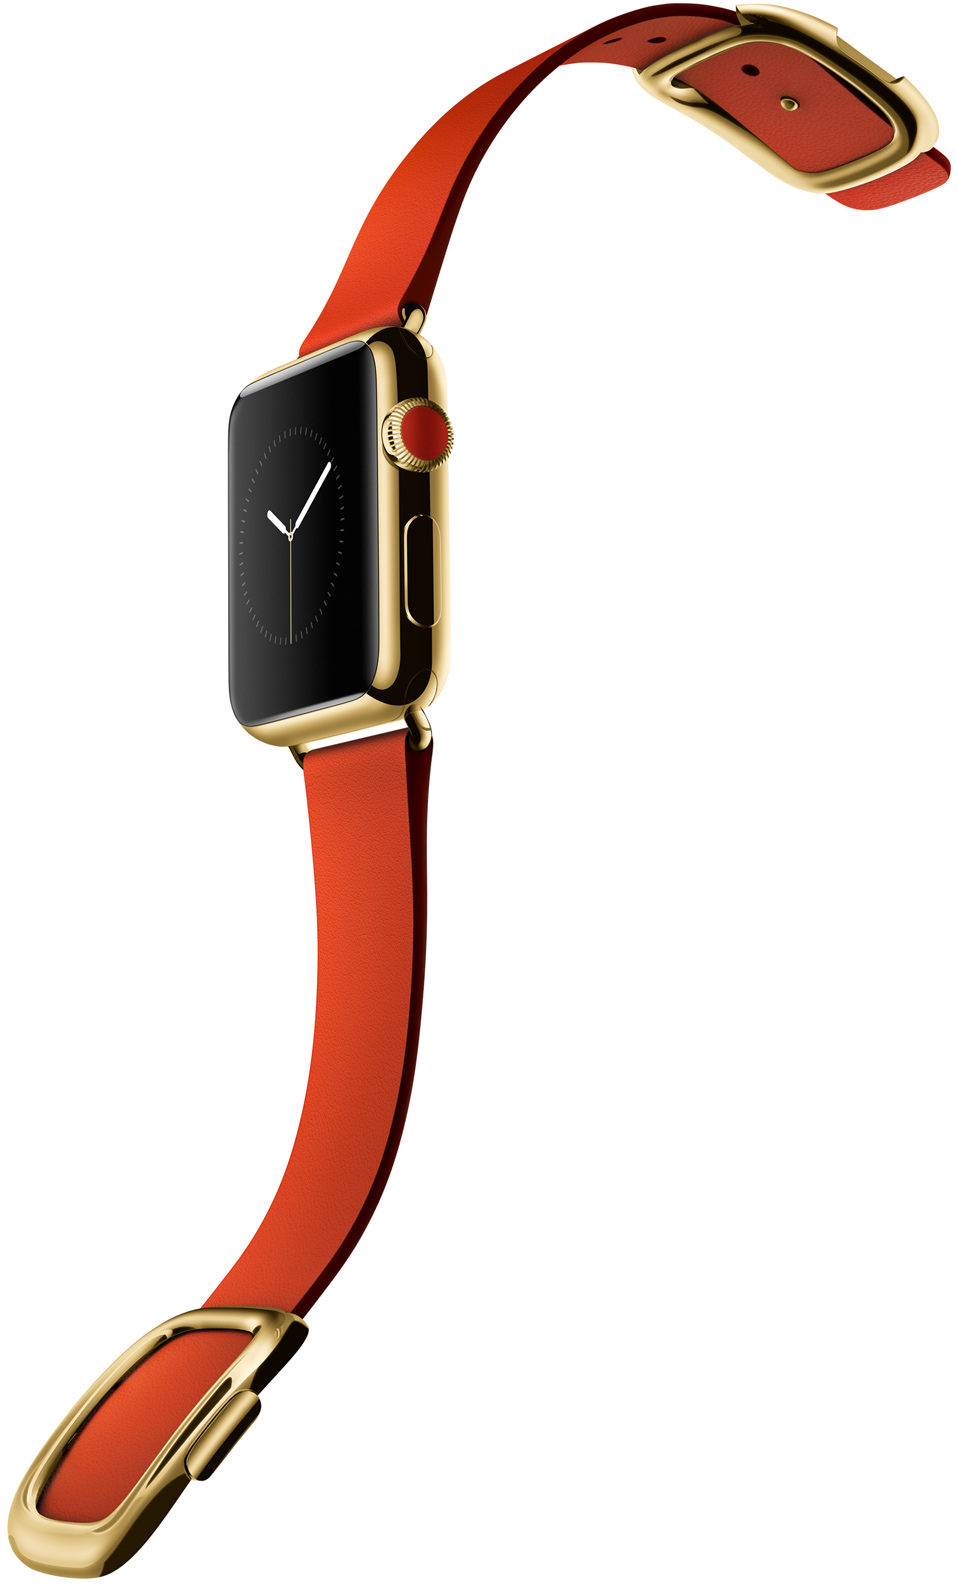 http://images.apple.com/v/watch/a/apple-watch-edition/images/yellow_gold_red_hero_large.jpg